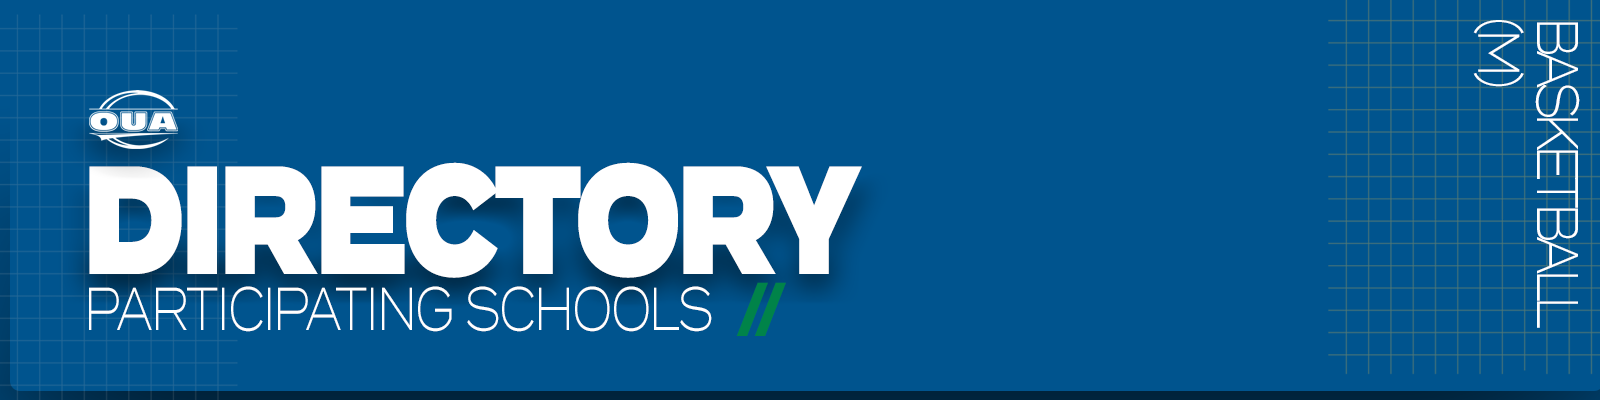 Predominantly blue graphic with large white text on the left side that reads 'Directory, Participating Schools' and small white vertical text on the right side that reads 'Basketball M'